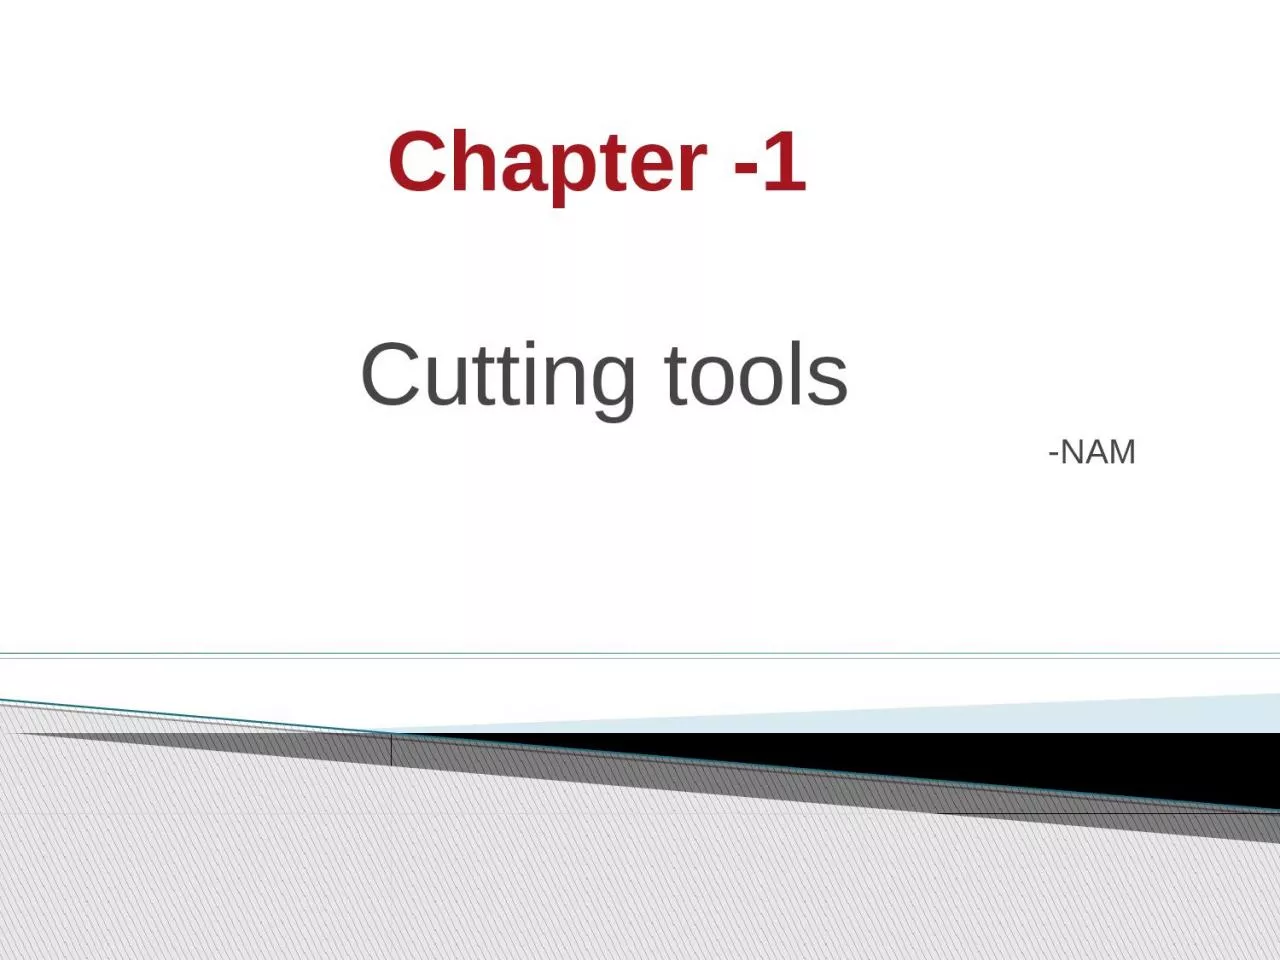 Chapter -1 Cutting tools